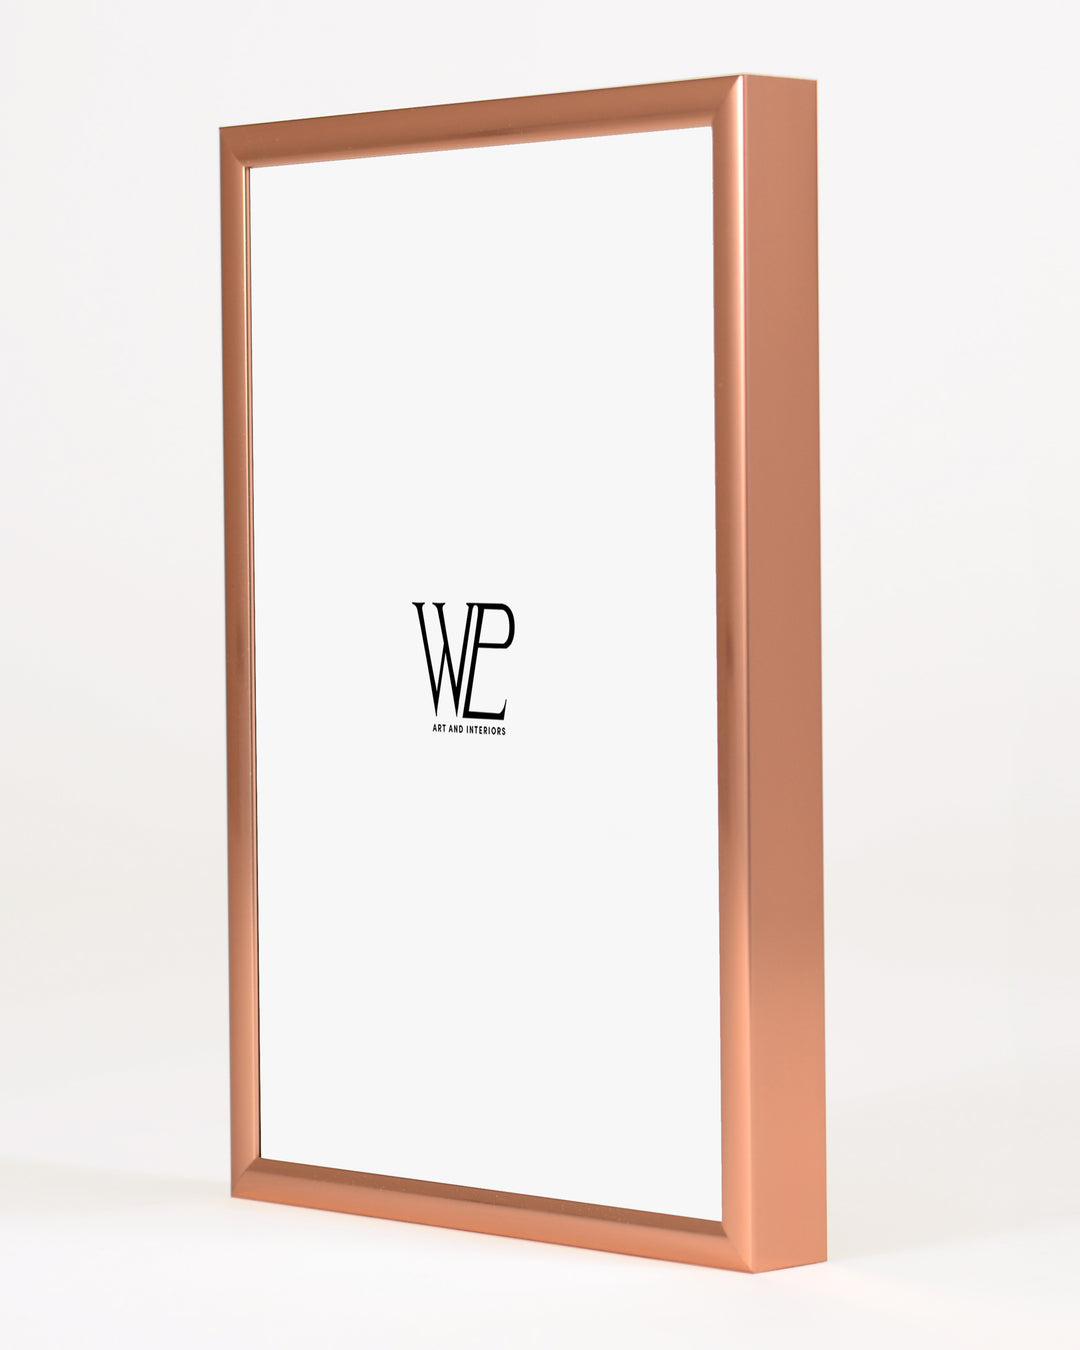 Rose Gold Picture Frame, A3 Size Photo Frame